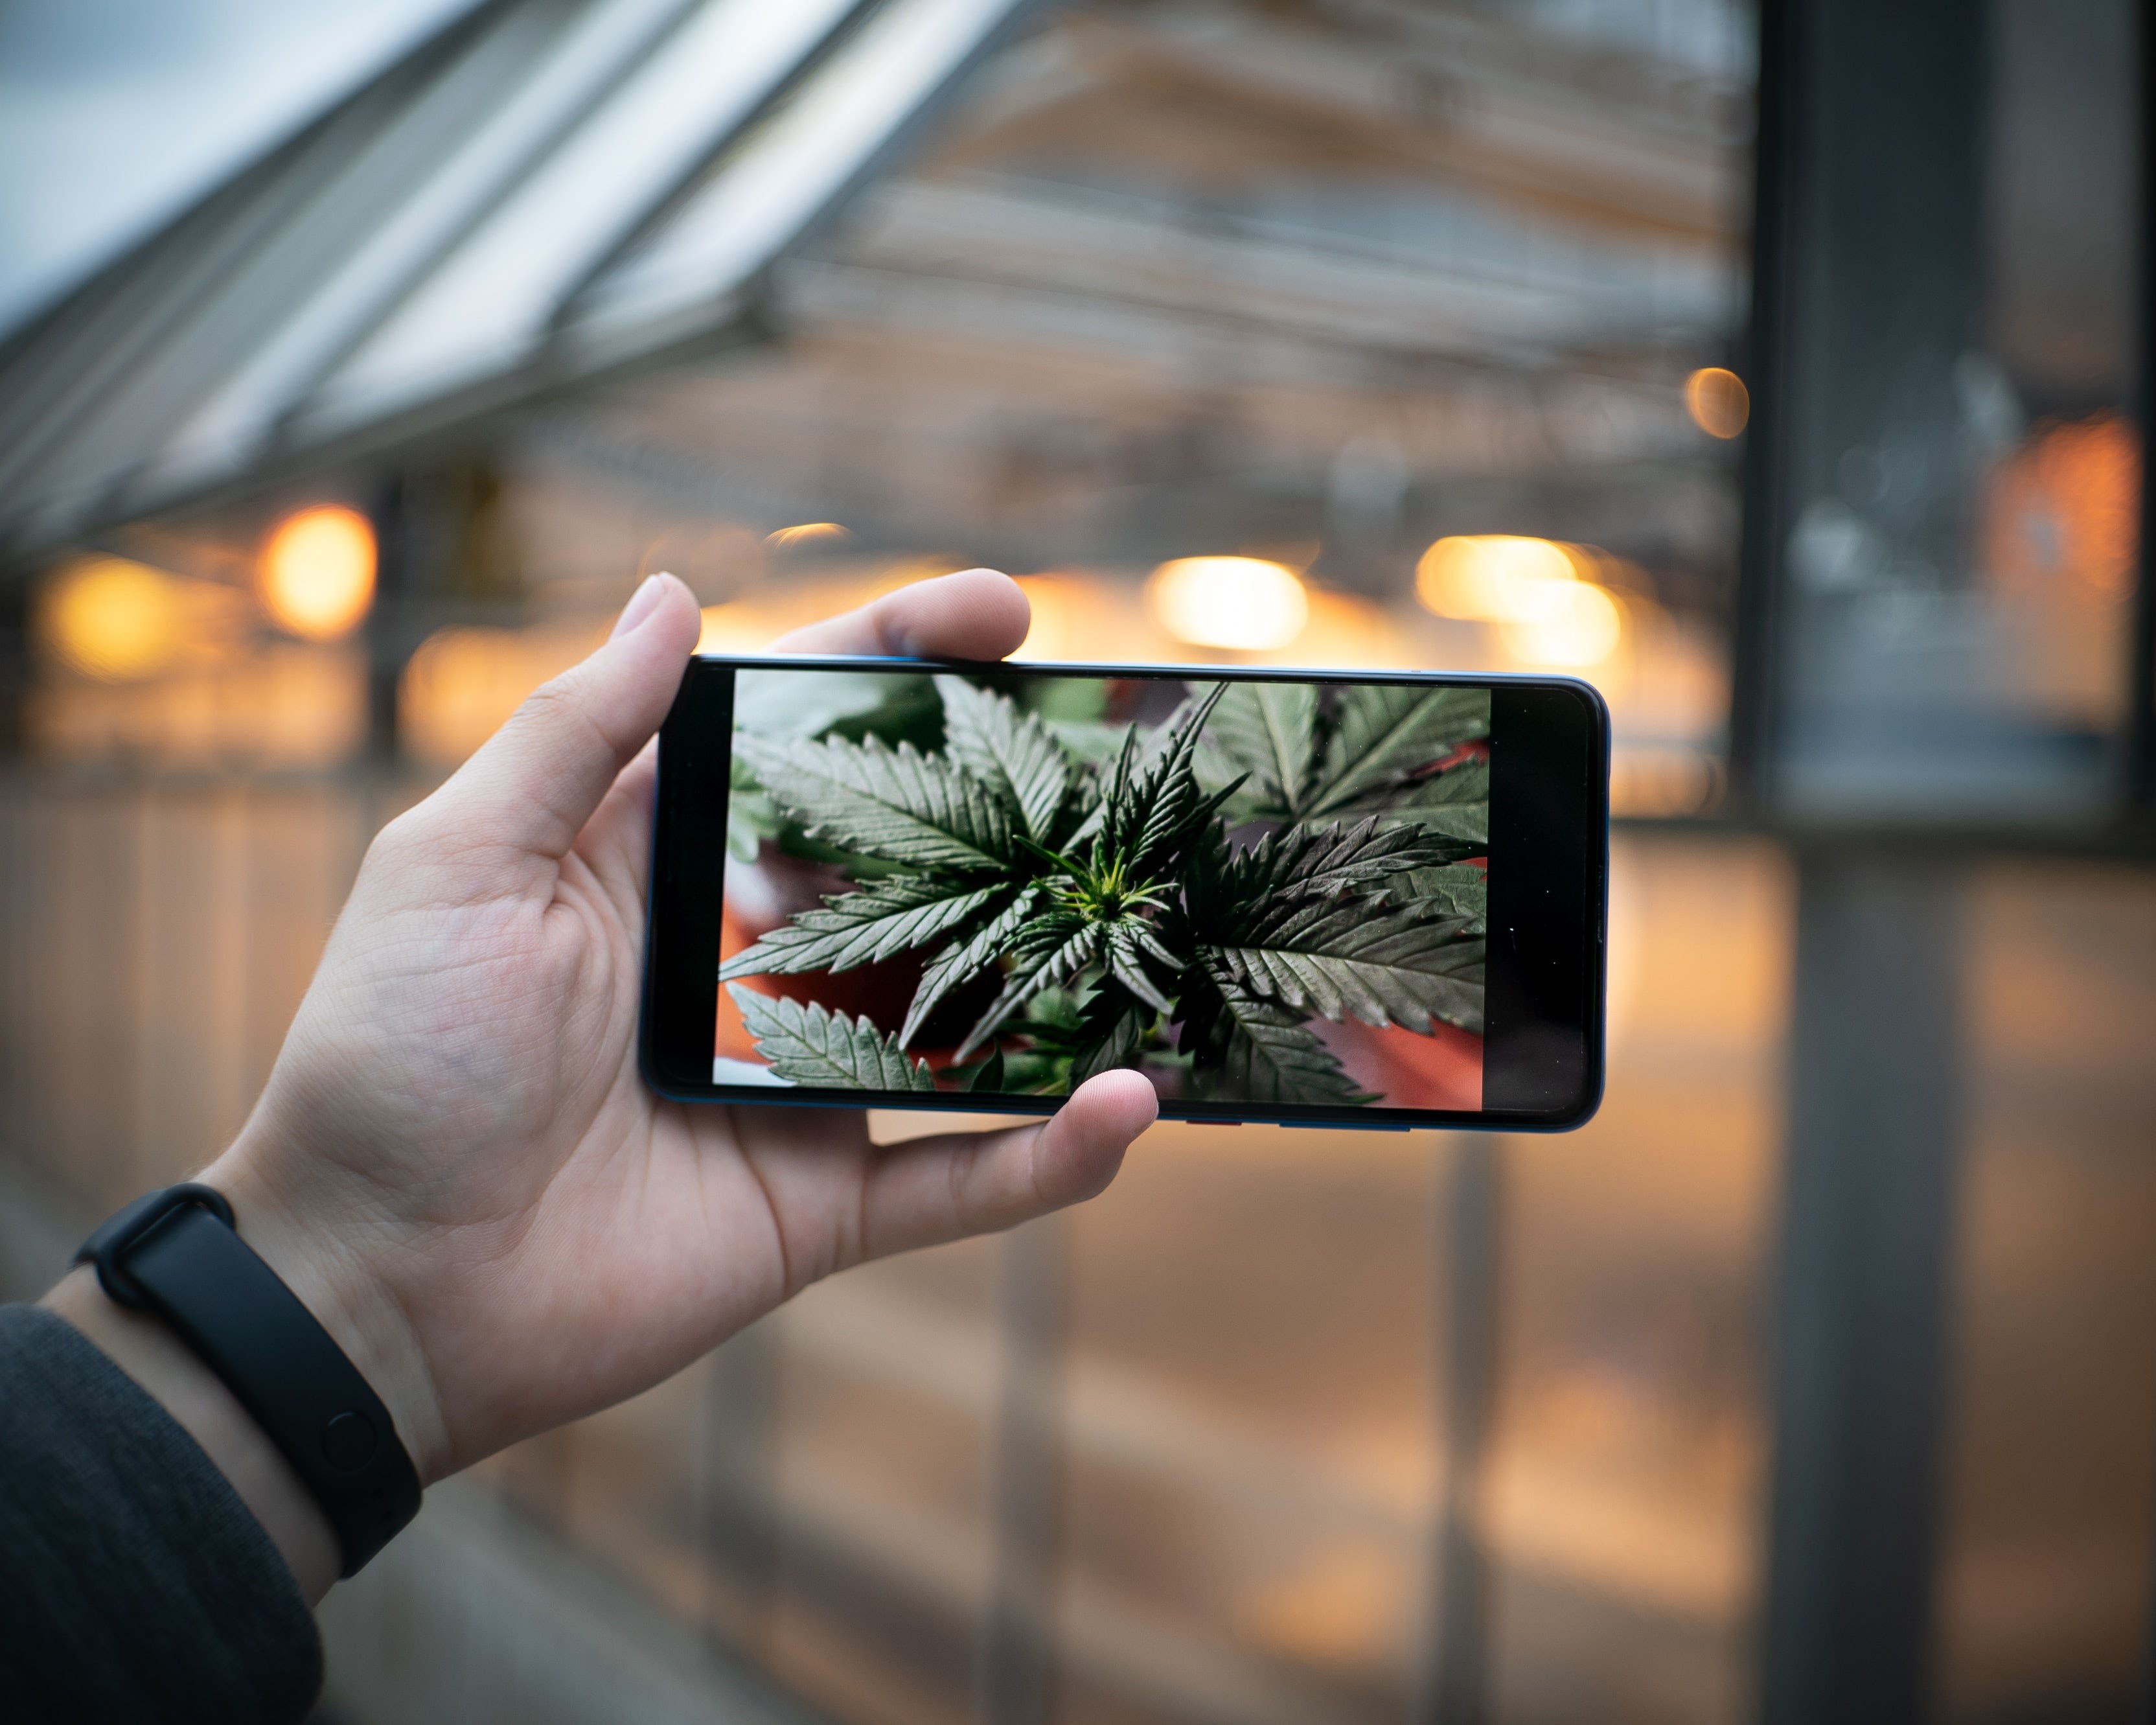 Leafly Launches iPhone App to Purchase From Cannabis Dispensaries Online